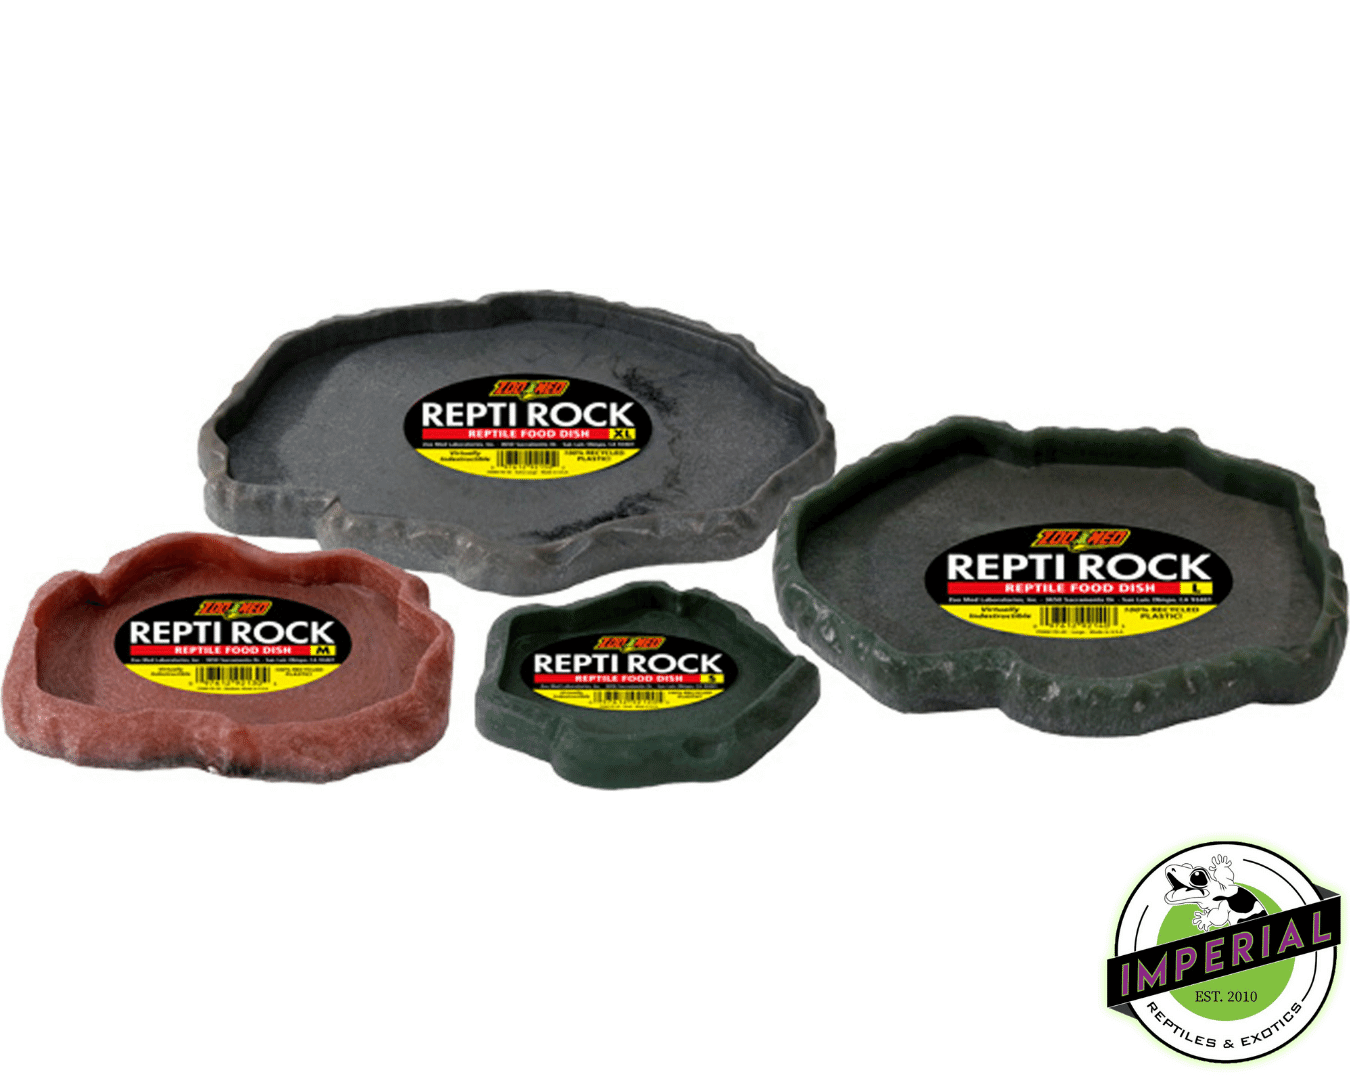 Buy reptile water dish and food bowl for sale online, water bowls and food dishes for pet reptiles